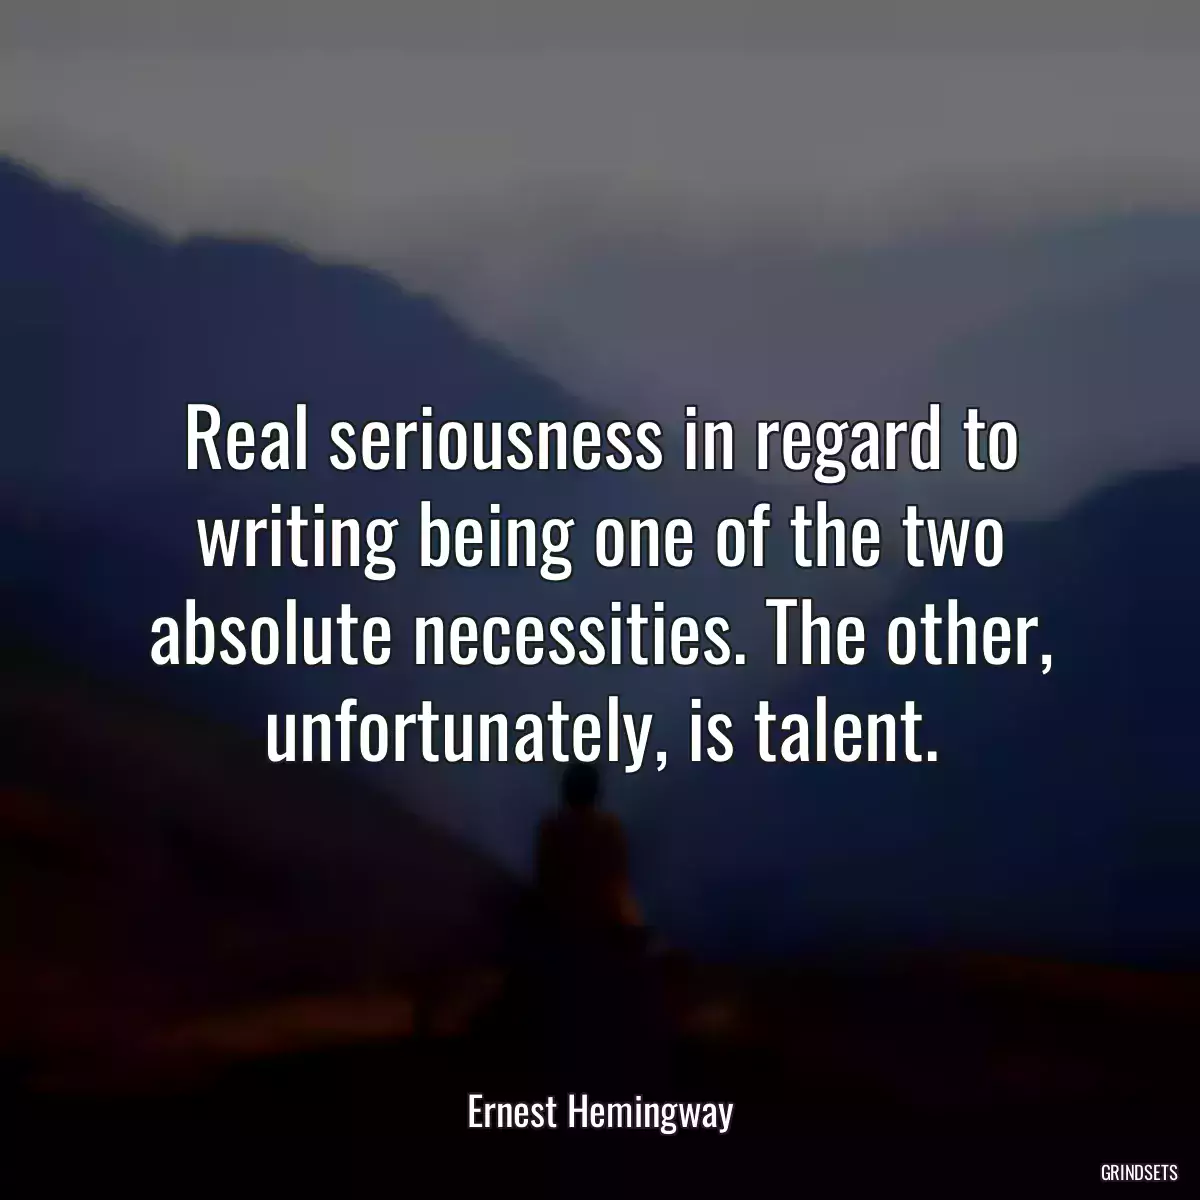 Real seriousness in regard to writing being one of the two absolute necessities. The other, unfortunately, is talent.